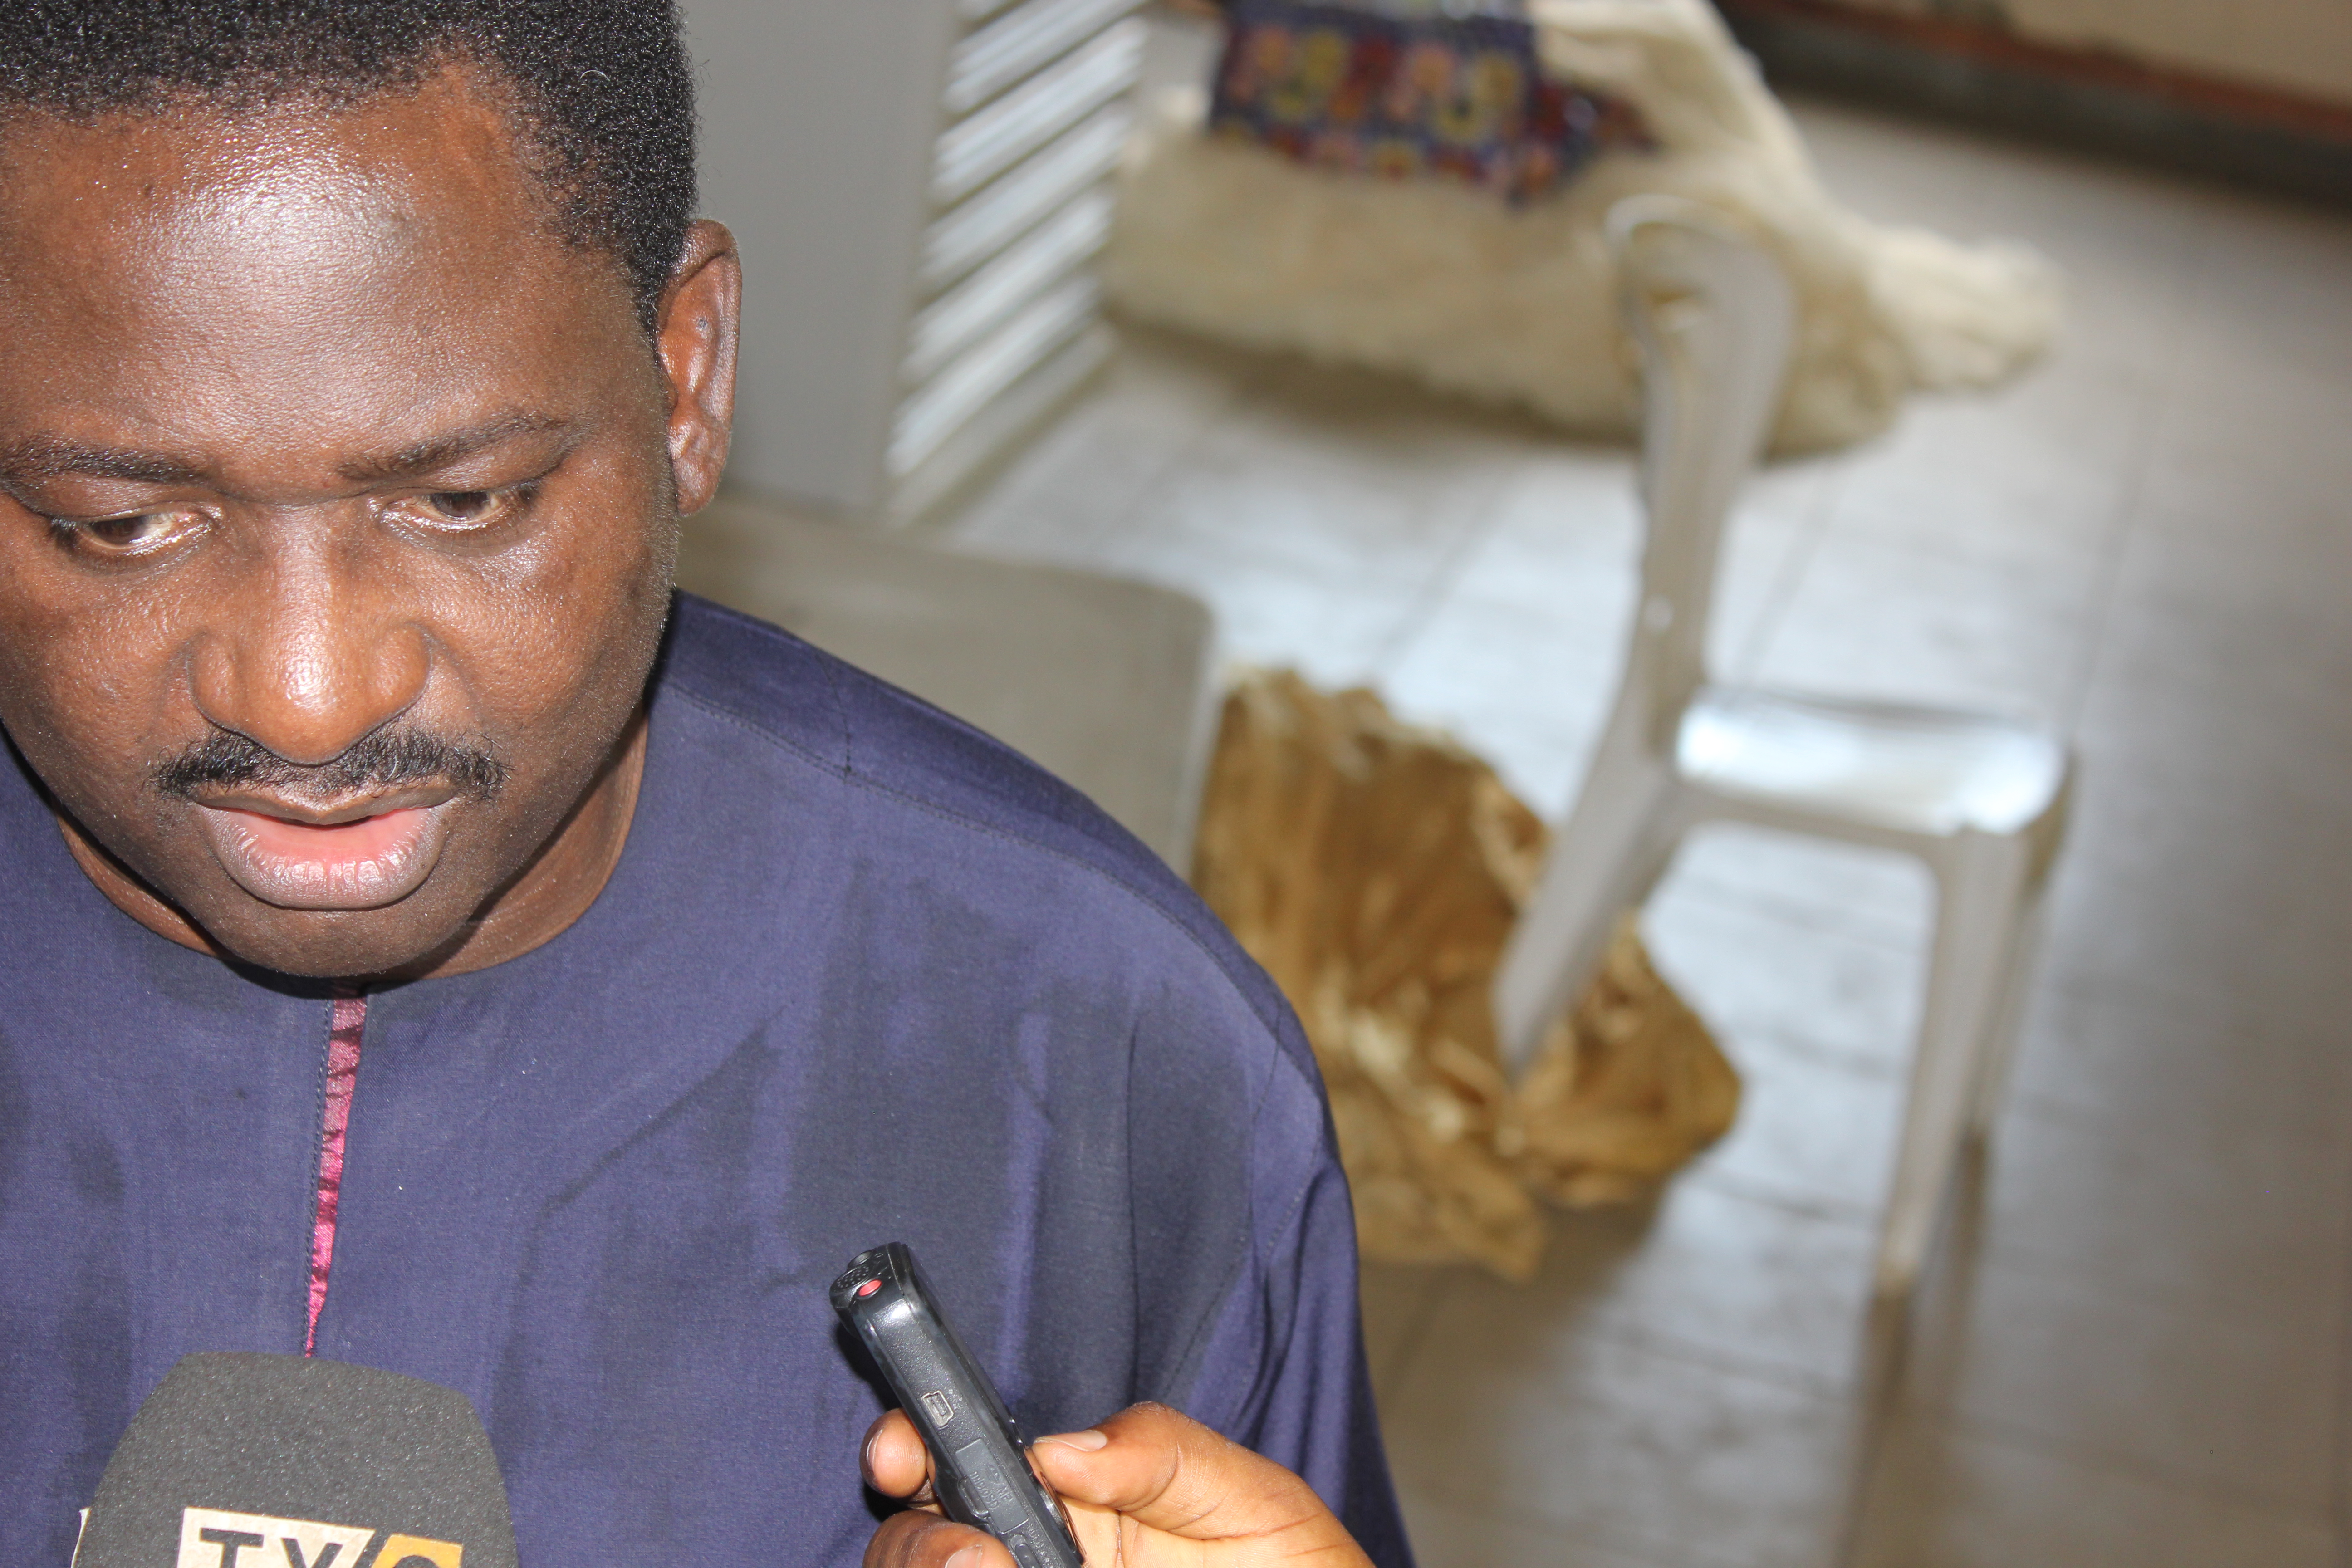 Mr Femi Adesina,Special Adviser to the President Media and Publicity being interviewed by Journalists at the event!